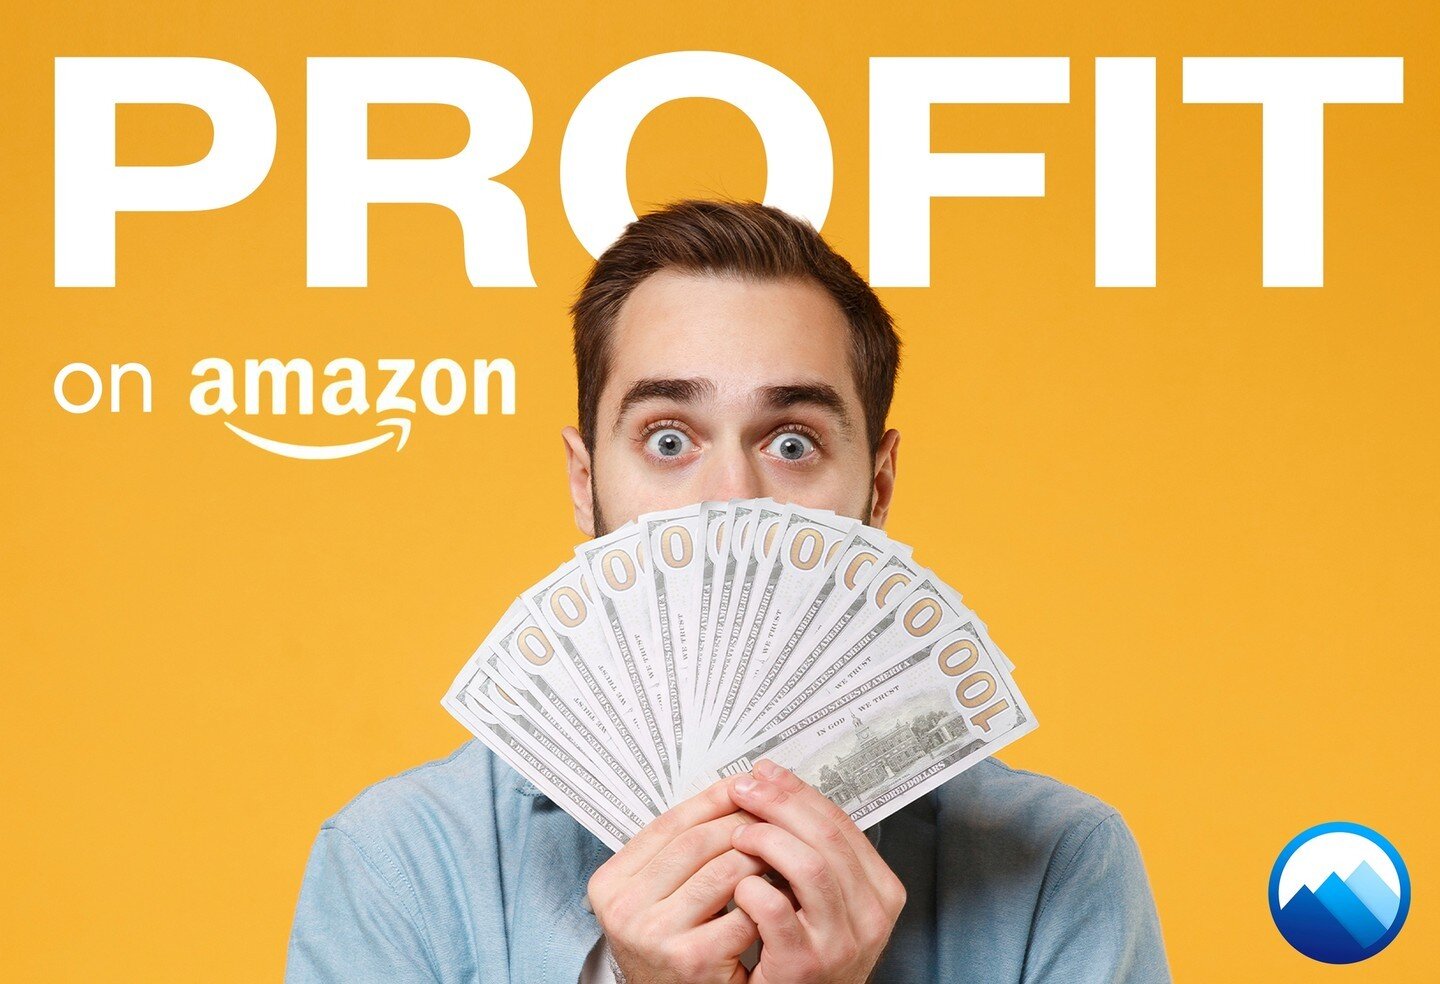 Has your brand been struggling to make a profit on Amazon?⁠
⁠
Revenue growth was important during lockdown when money was cheap and customers could only shop online.⁠
⁠
Brands are now coming to us with a much different goal: profitability. ⁠
⁠
...and